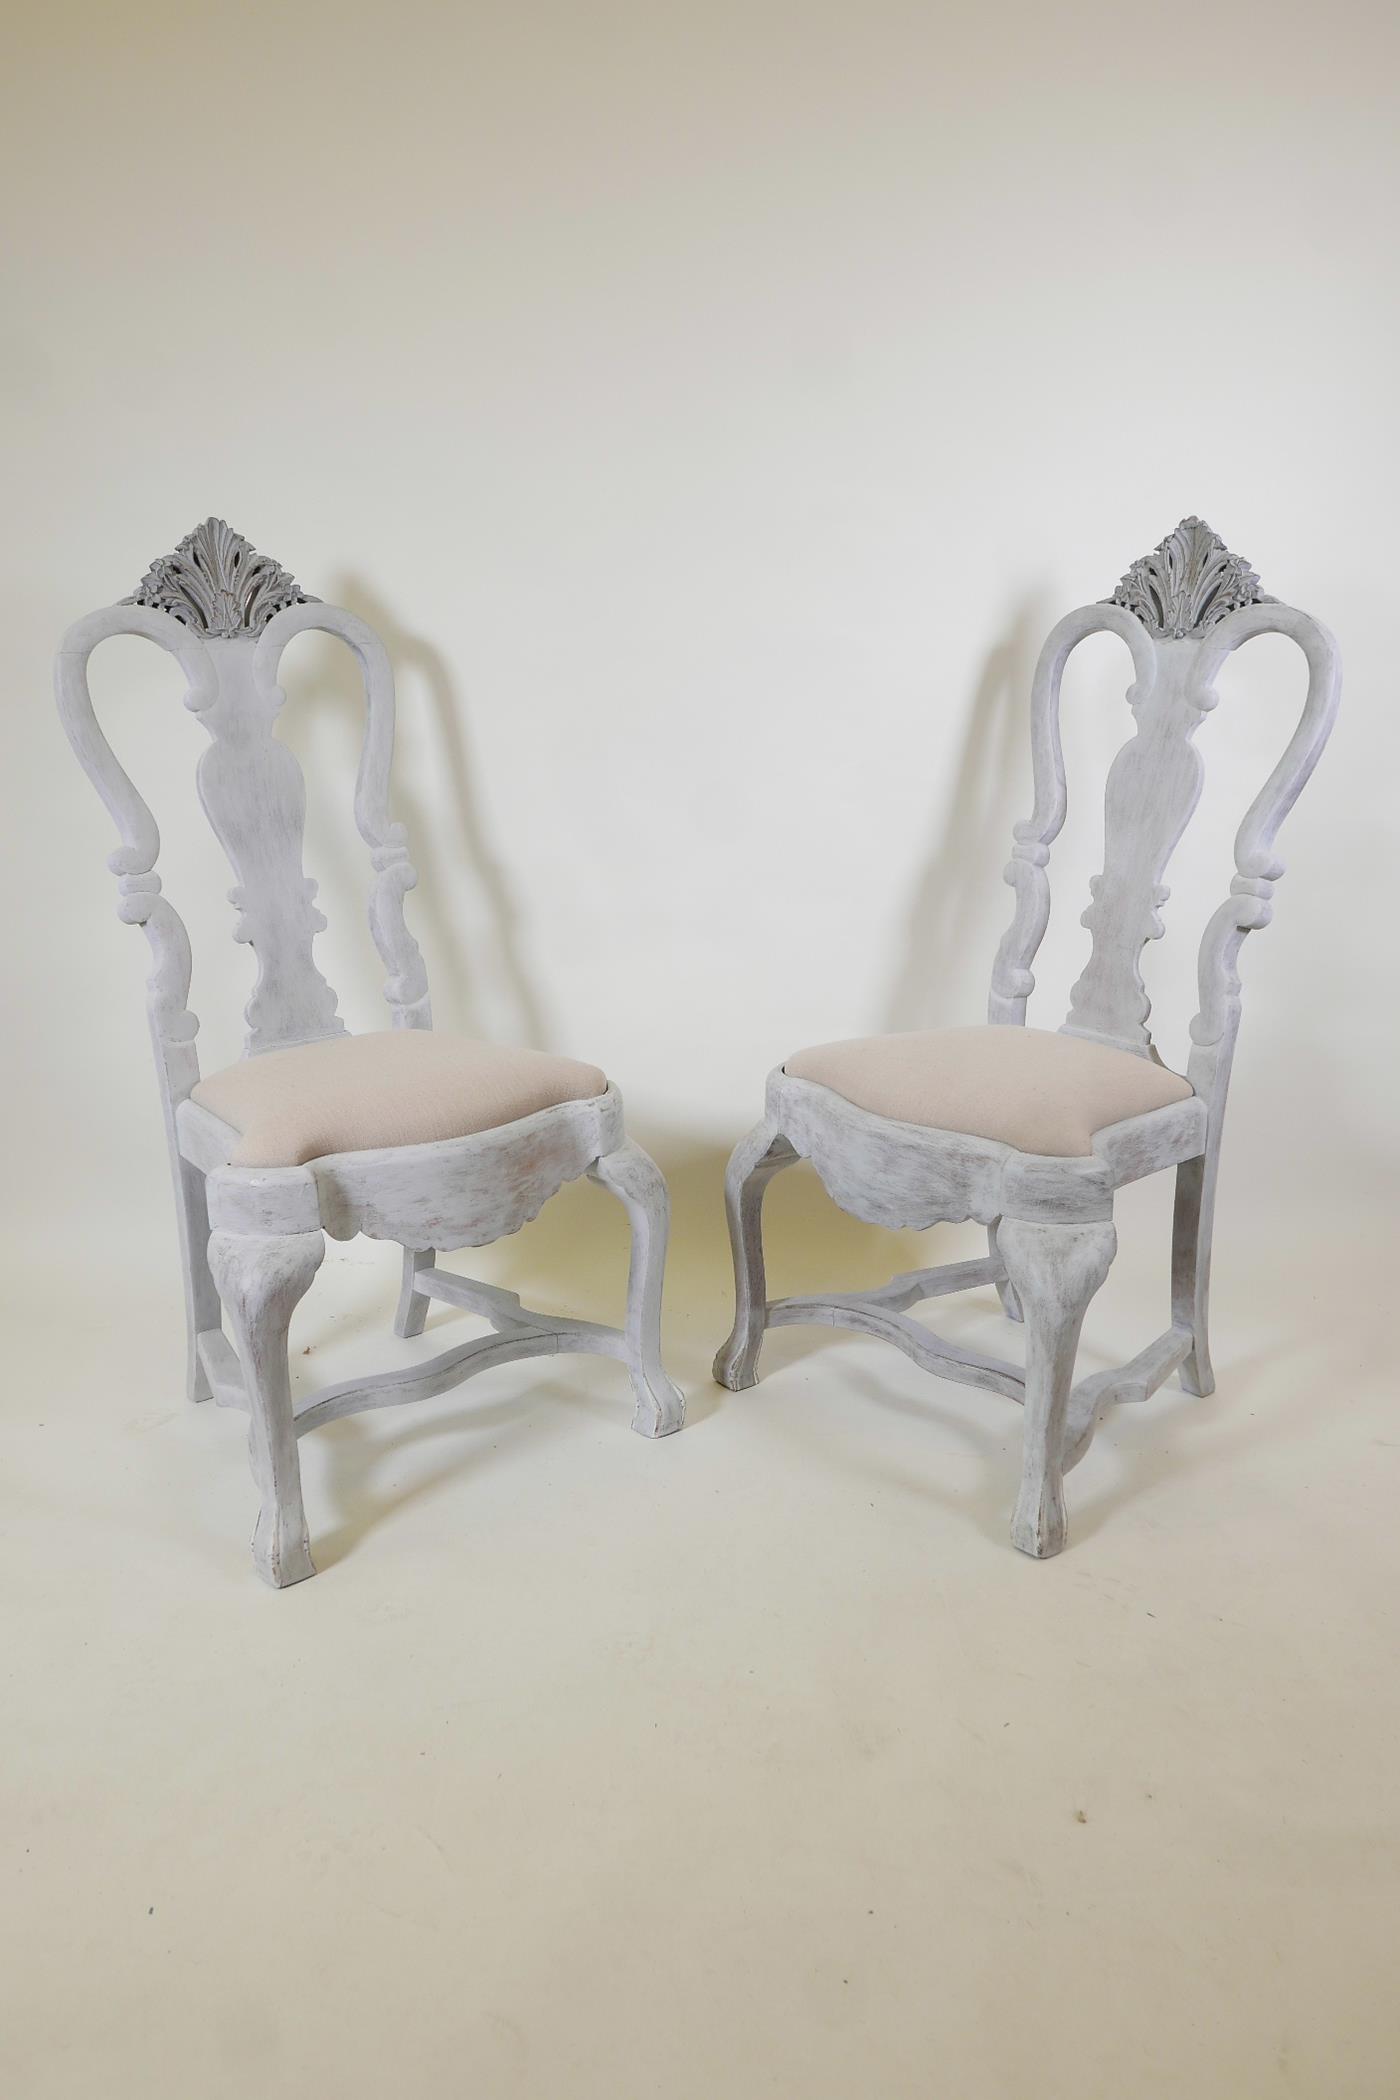 A pair of early C20th Gustavian style painted and distressed chairs, with carved details, 45" high